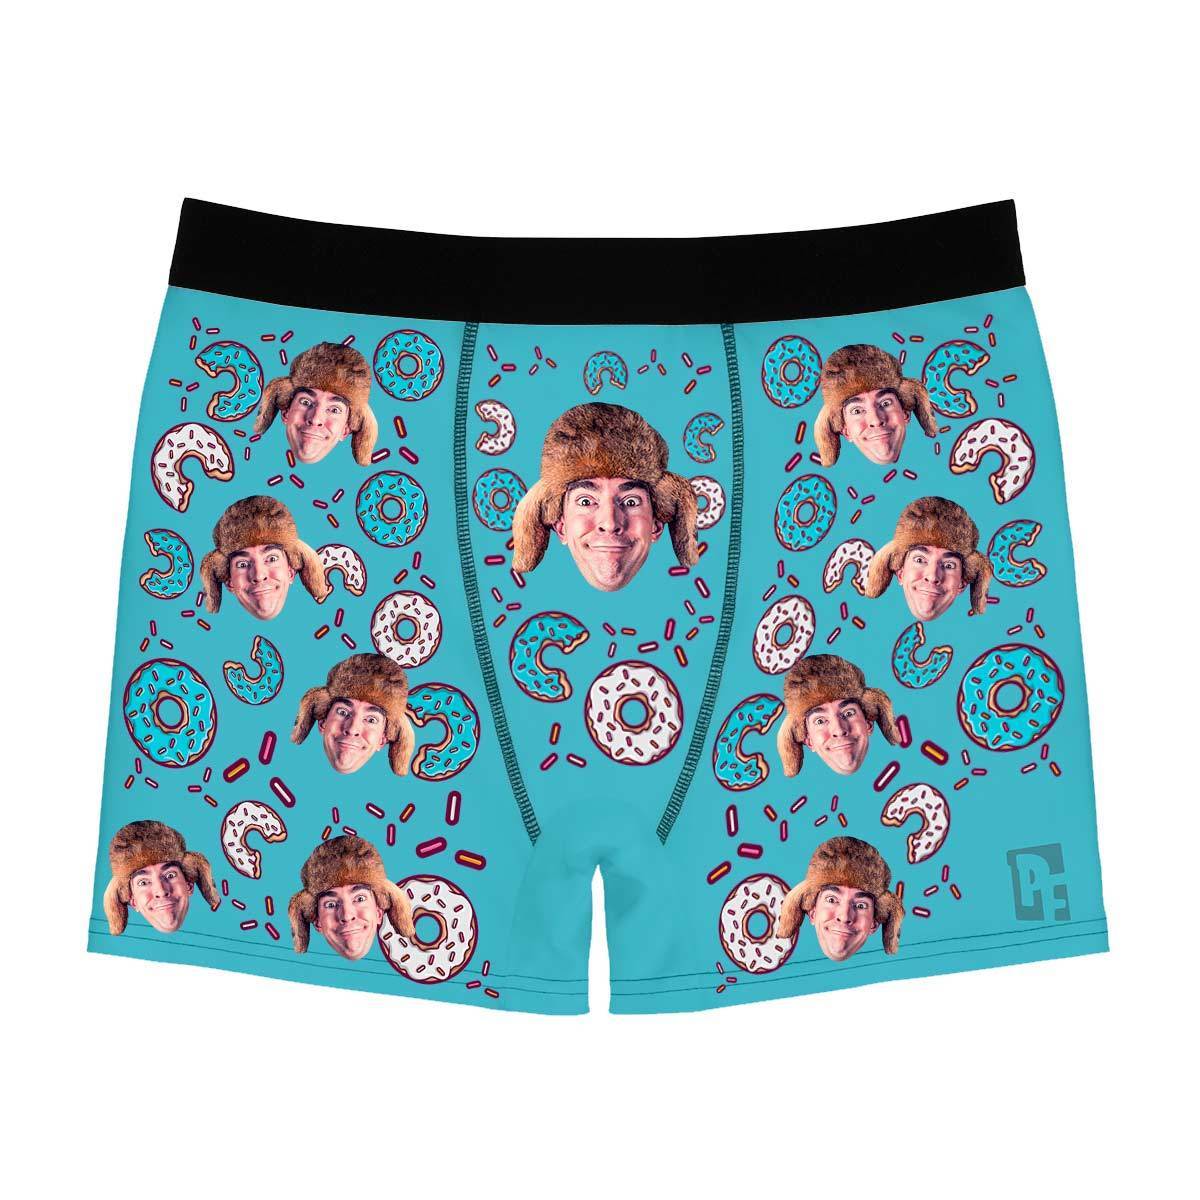 Blue Donuts men's boxer briefs personalized with photo printed on them